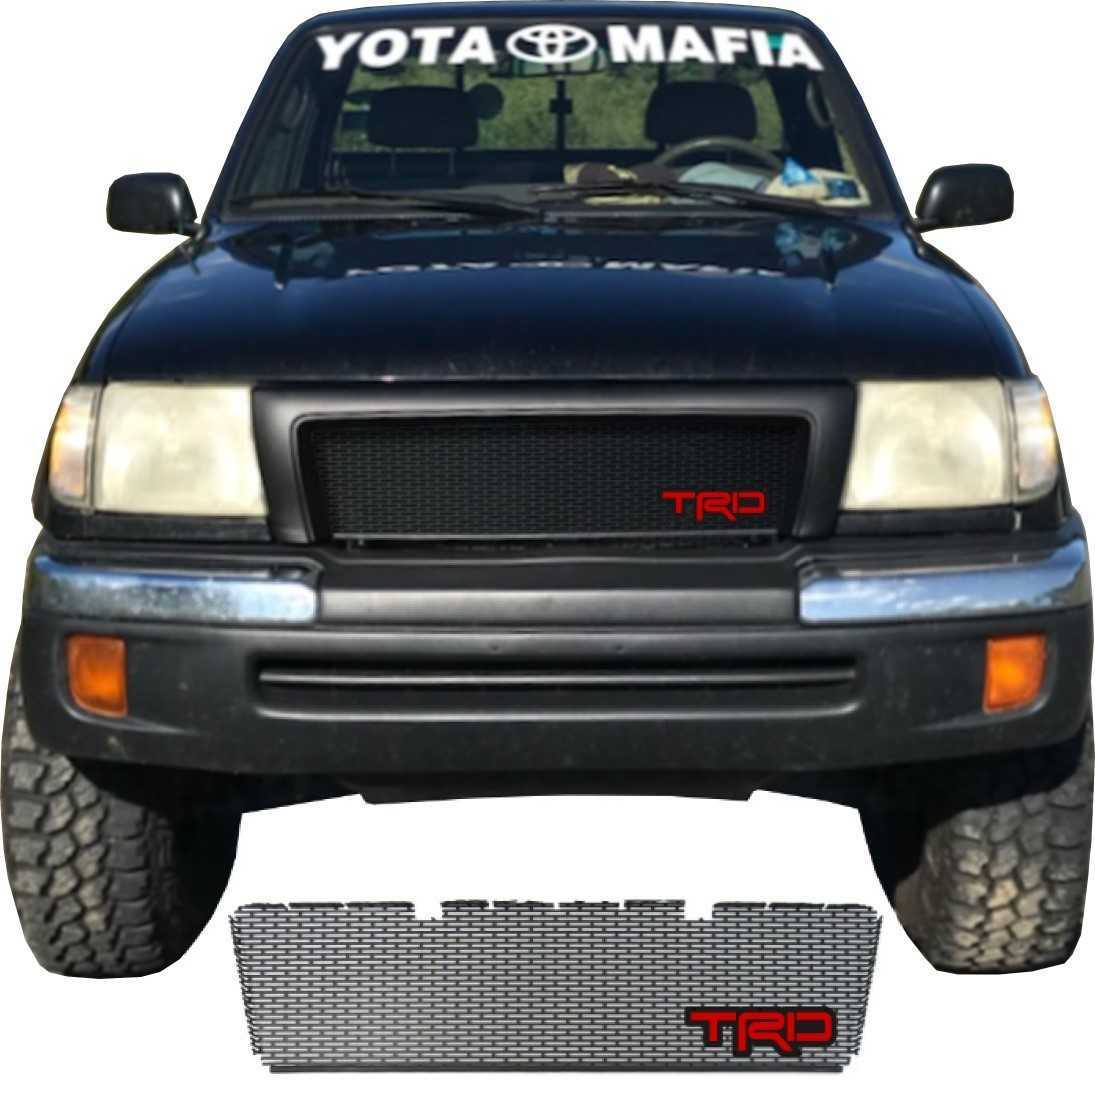 1998 - 2000 Toyota Tacoma Grill Mesh With TRD Emblem